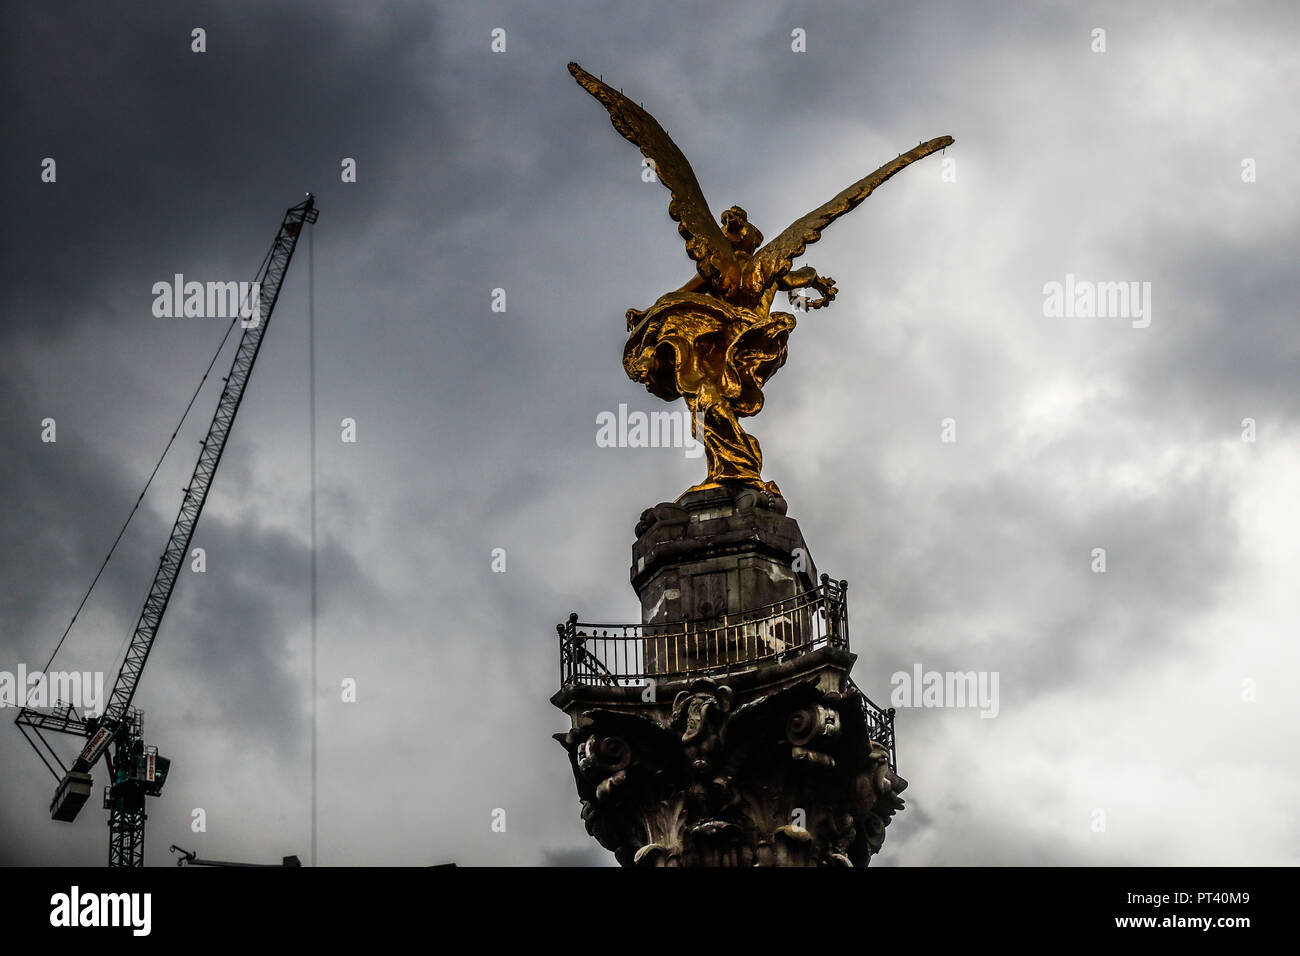 Monument to the Independence of Mexico. The Angel or The Angel of Independence. Sculpture located in the roundabout of Paseo de la Reforma in Mexico City. (Photo: Luis Gutierrez / NortePhoto.com)... Monumento a la Independencia de Mexico. El Ángel o El Ángel de la Independencia. Escultura ubicada en la glorieta del paseo de la Reforma en la Ciudad de México. (Foto: Luis Gutierrez / NortePhoto.com). Stock Photo